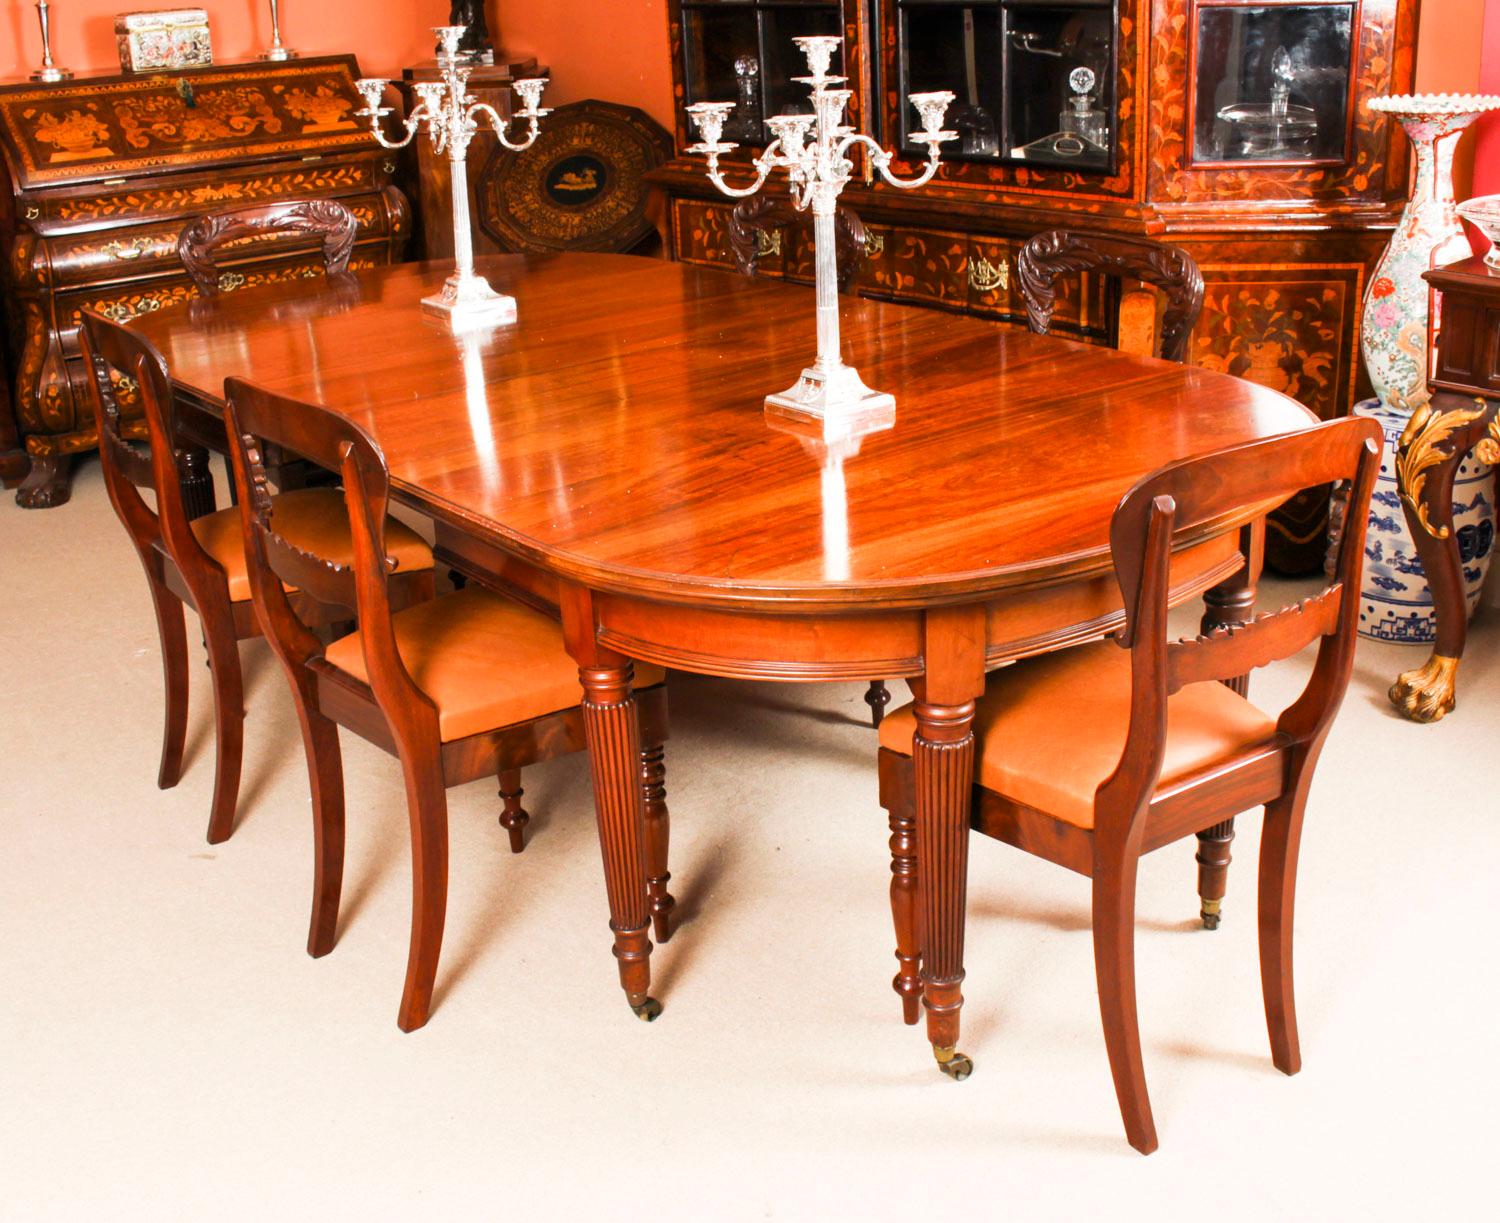 English Antique Victorian Oval Extending Dining Table & 6 Chairs, 19th Century